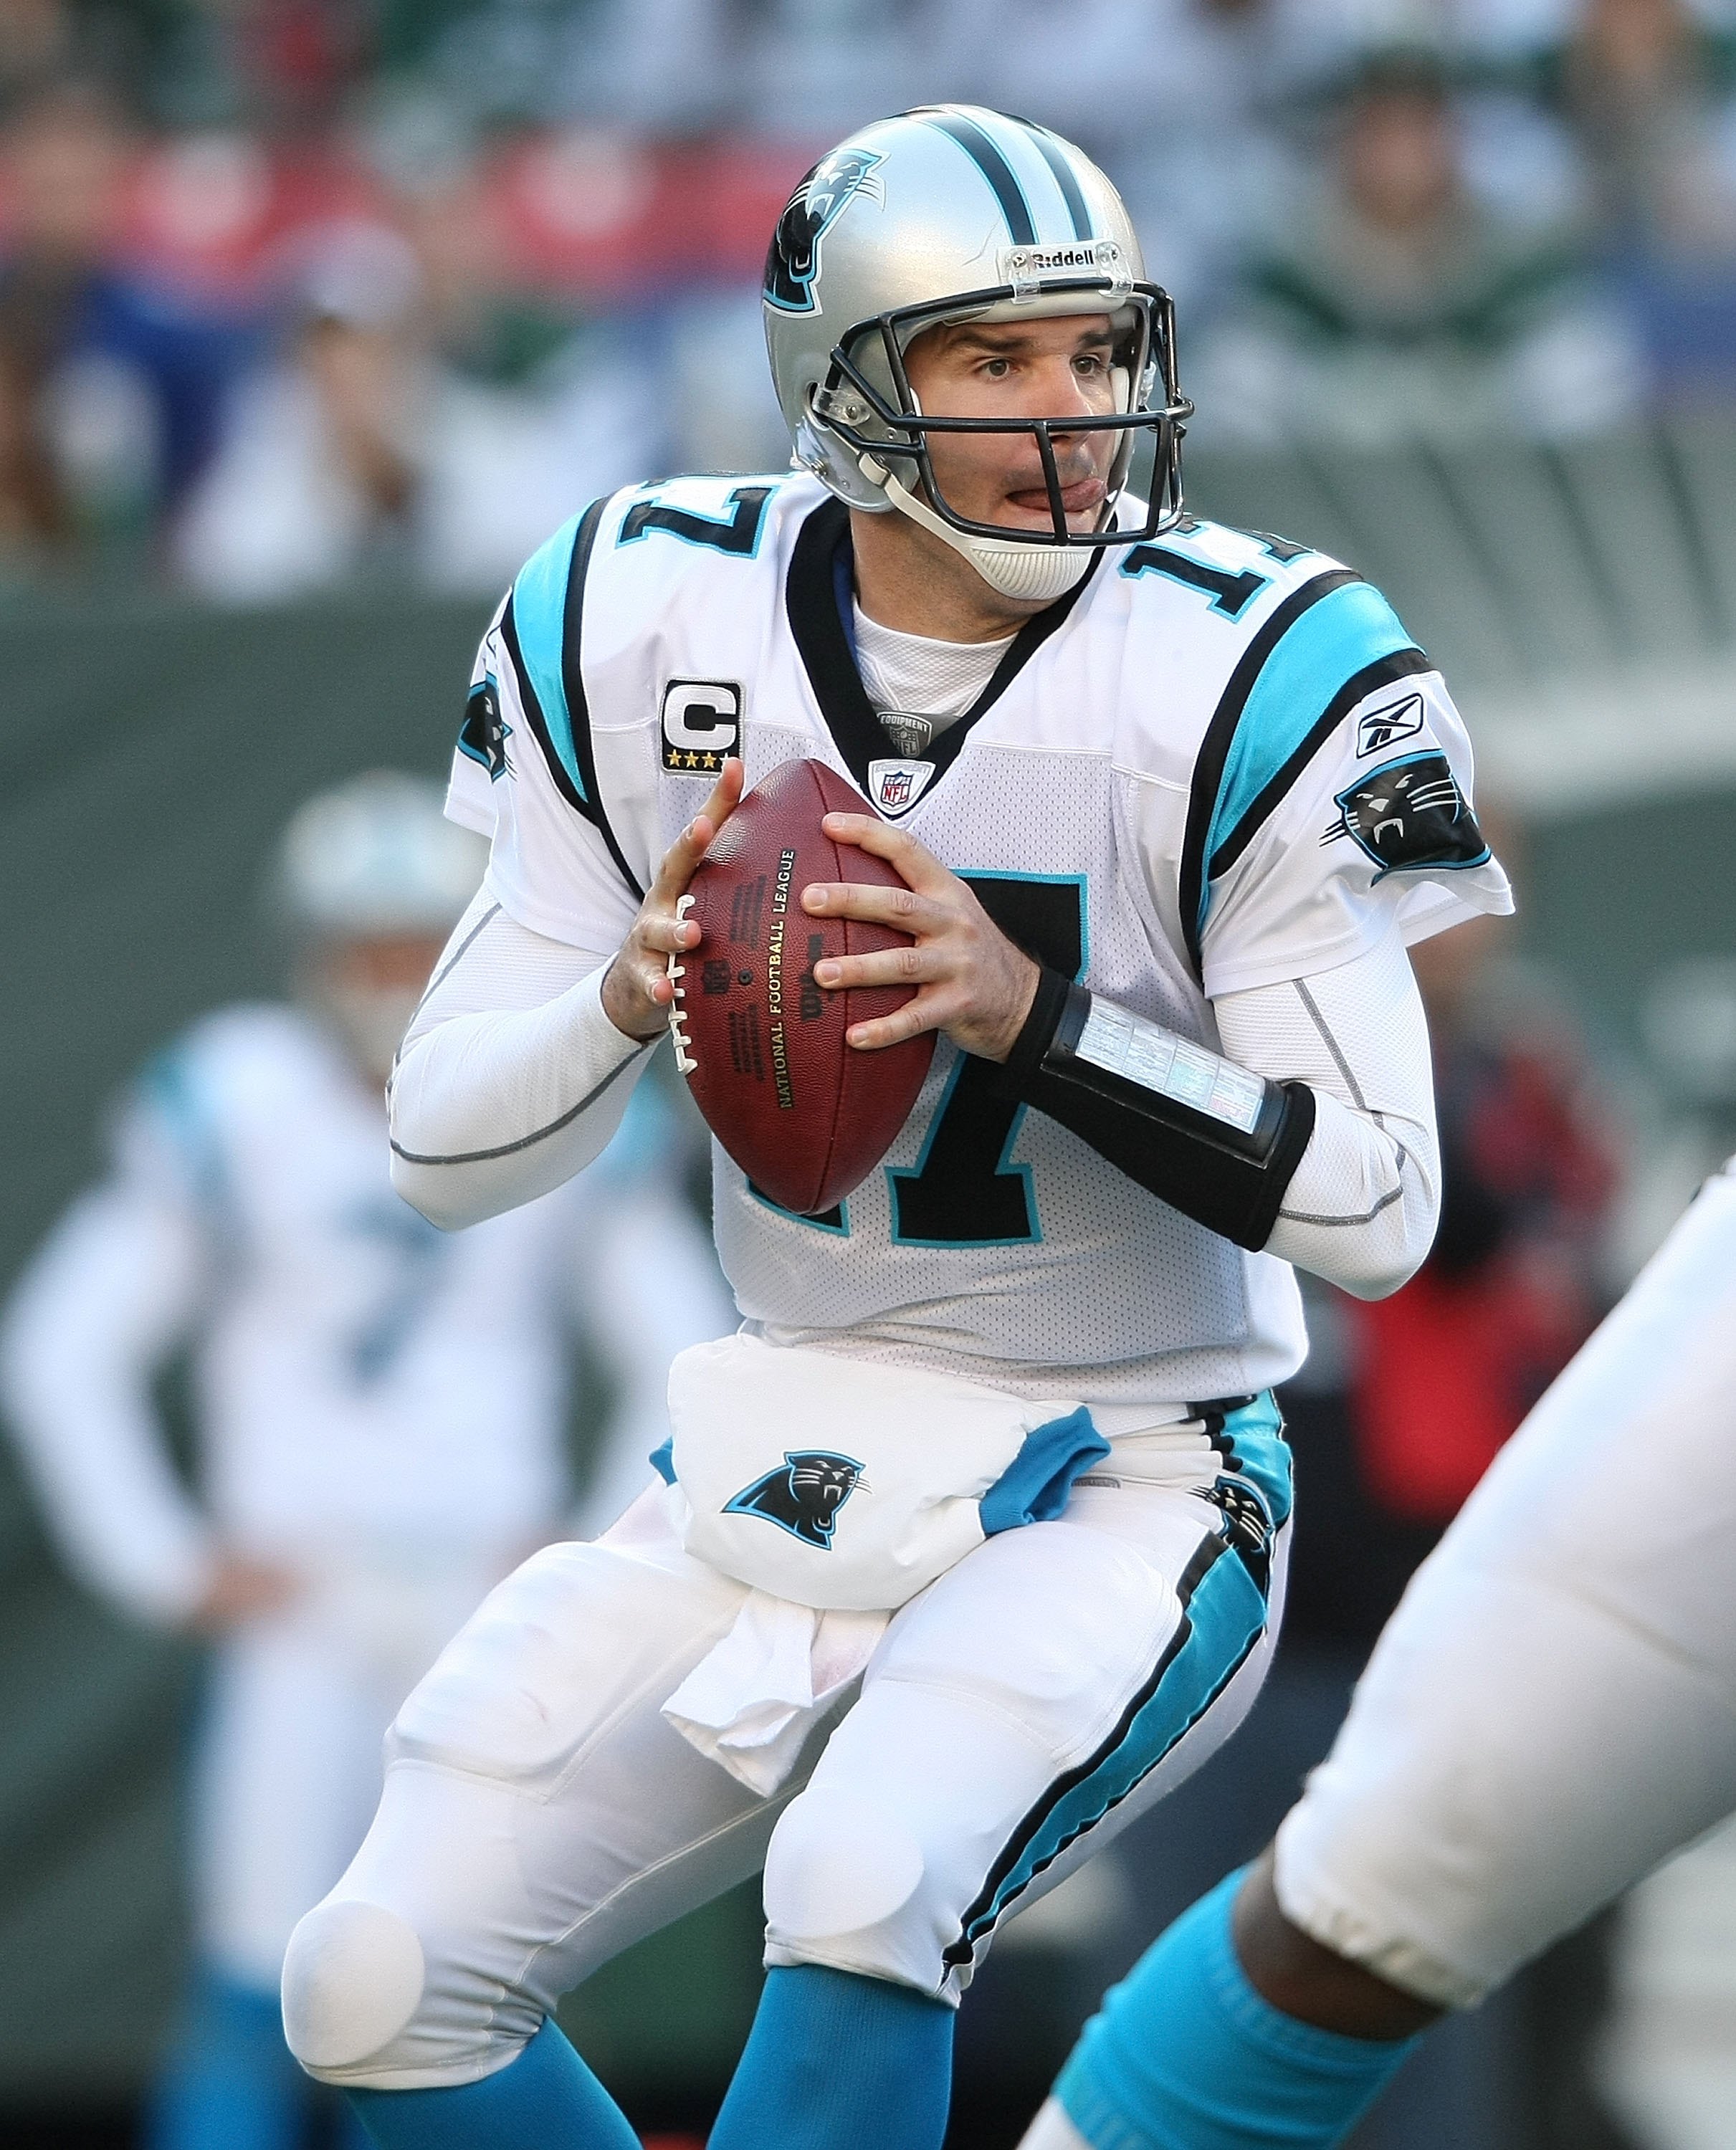 EAST RUTHERFORD, NJ - NOVEMBER 29:  Jake Delhomme #17 of the Carolina Panthers passes against the New York Jets at Giants Stadium on November 29, 2009 in East Rutherford, New Jersey.  (Photo by Nick Laham/Getty Images)